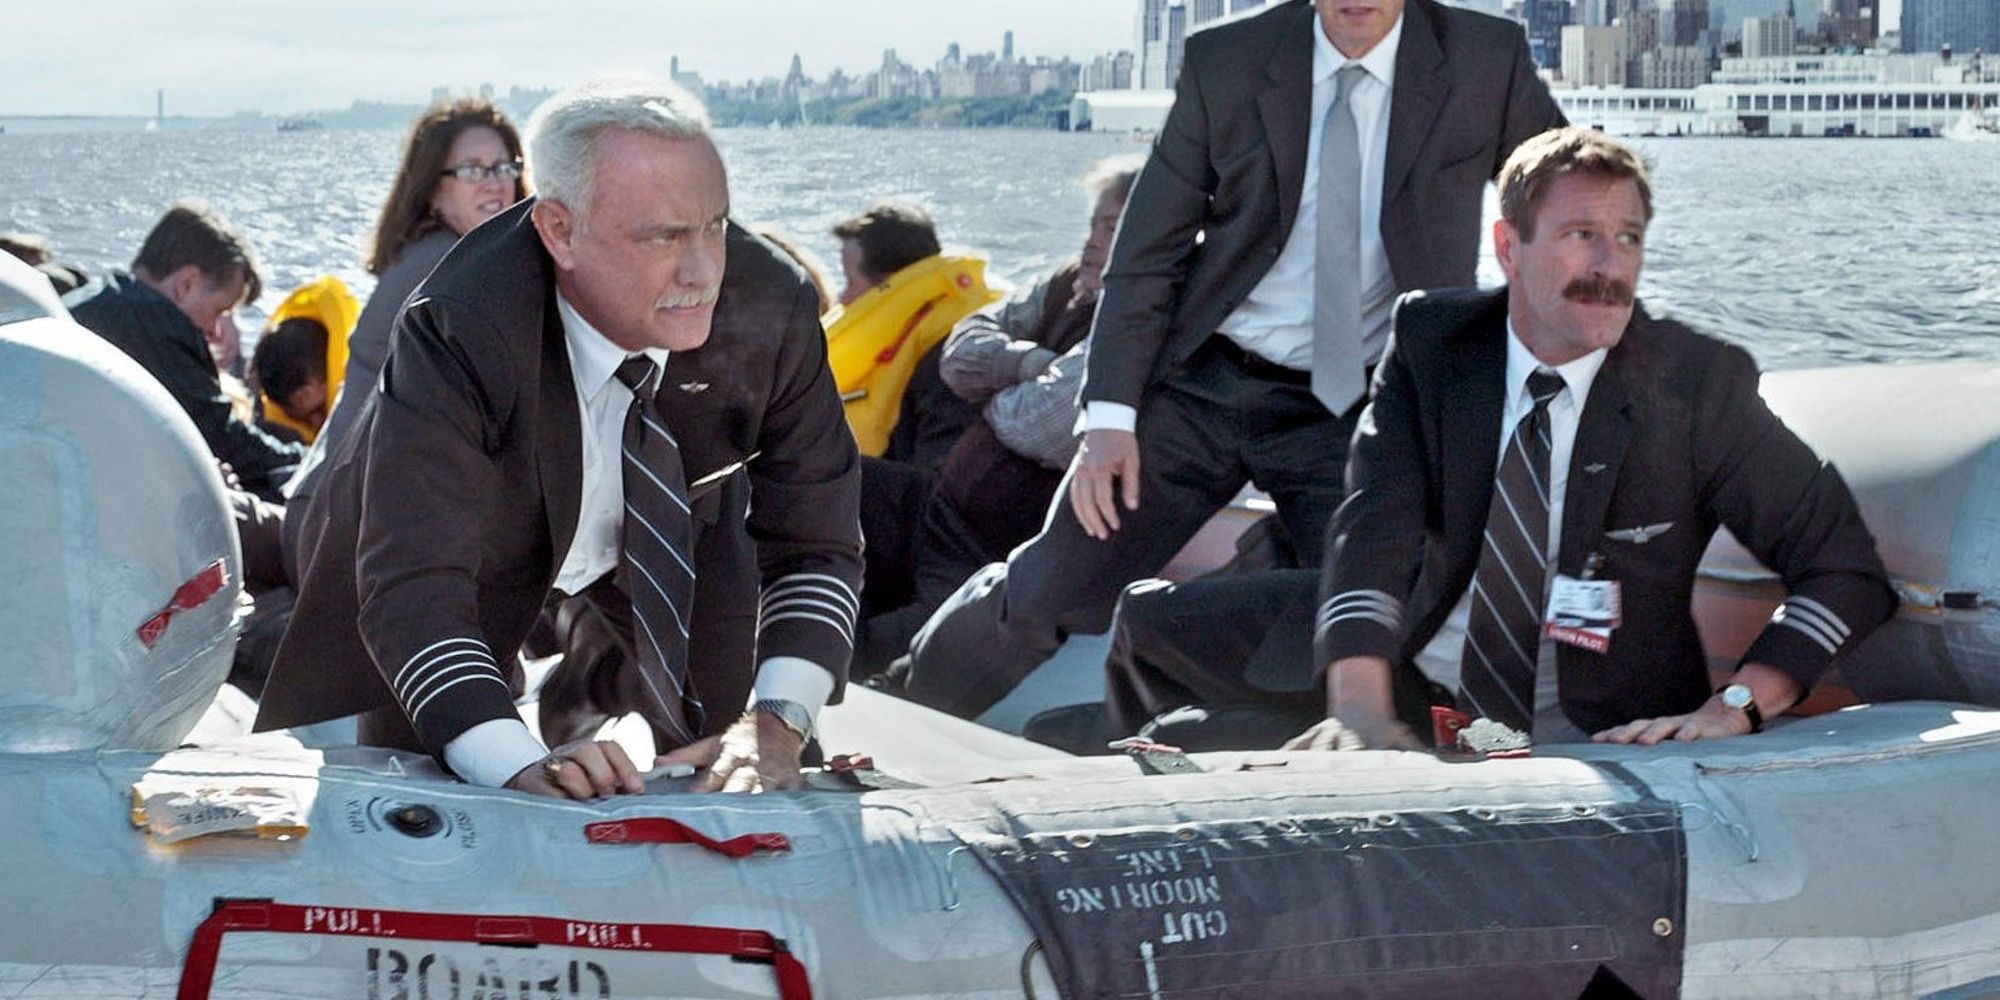 Tom Cruise on a life raft after the plane crash in Sully.